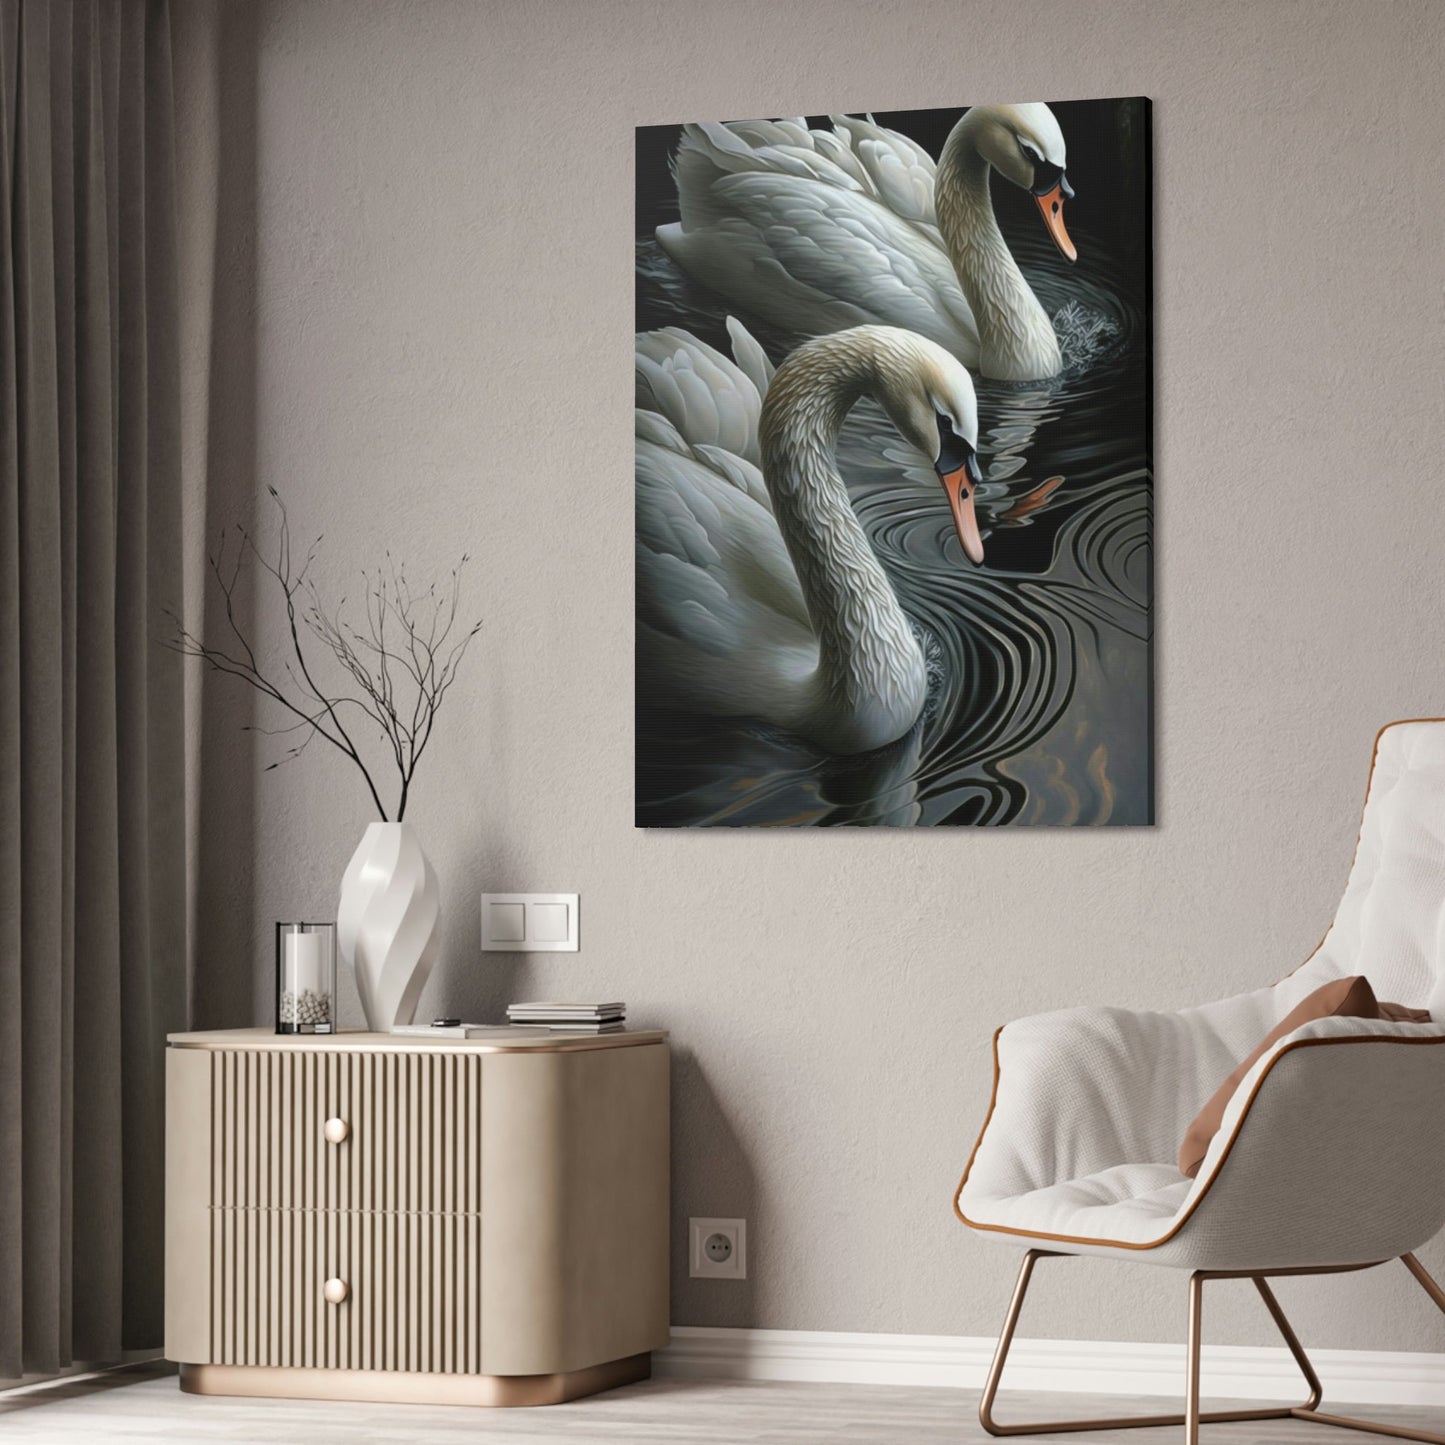 The Beauty of Swans: A Soft and Elegant Painting on Canvas